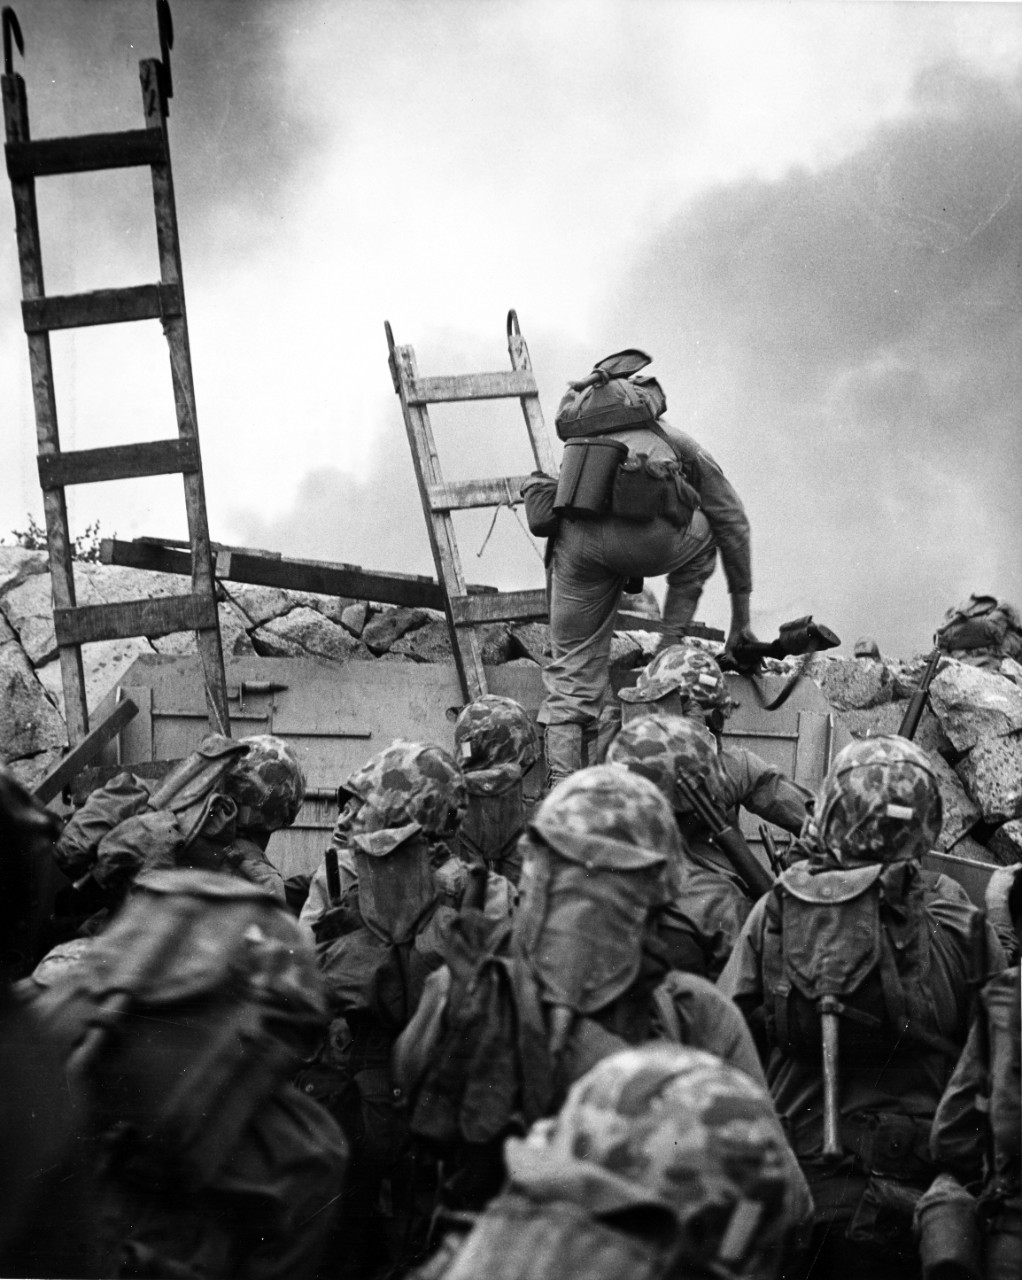 First Lieutenant Baldomero Lopez, USMC, leads the 3rd Platoon, Company A, 1st Battalion, 5th Marines over the seawall on the northern side of Red Beach, as the second assault wave lands, 15 September 1950.